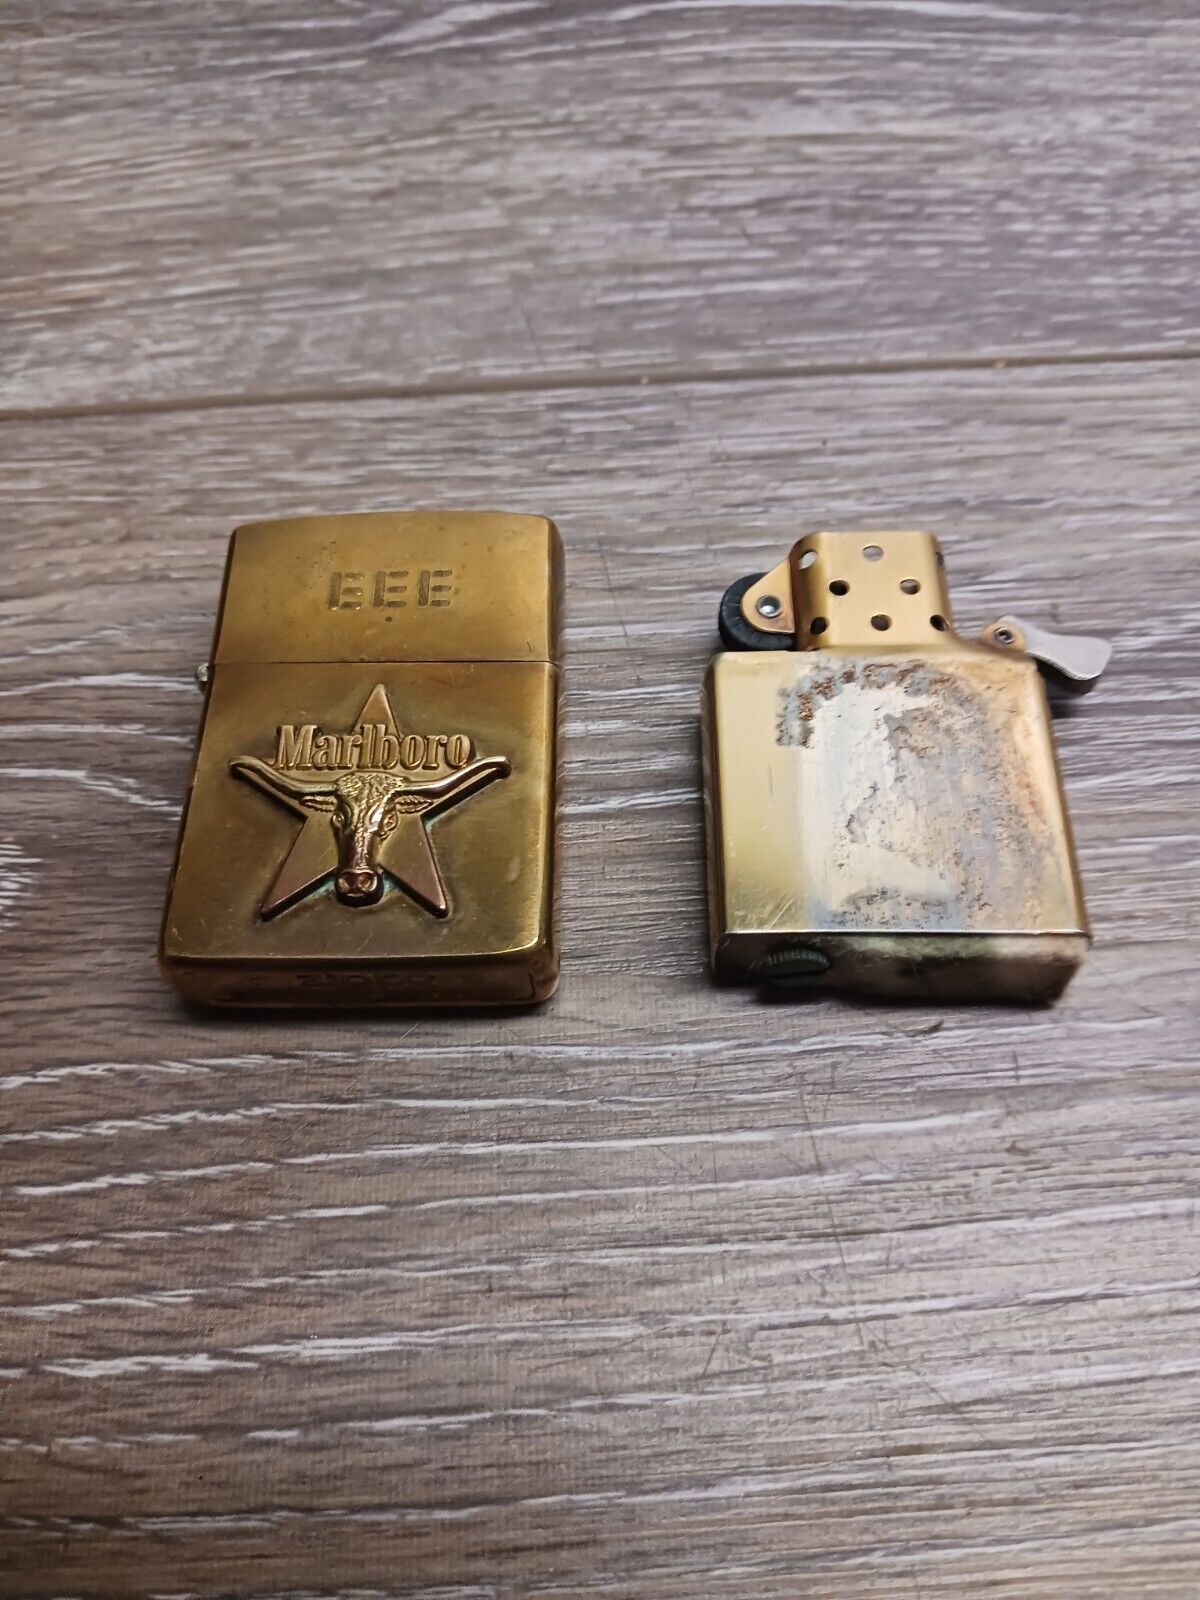 Rare Vintage Early 1990s Brass Zippo Marlboro Longhorn Lighter With Initials EEE